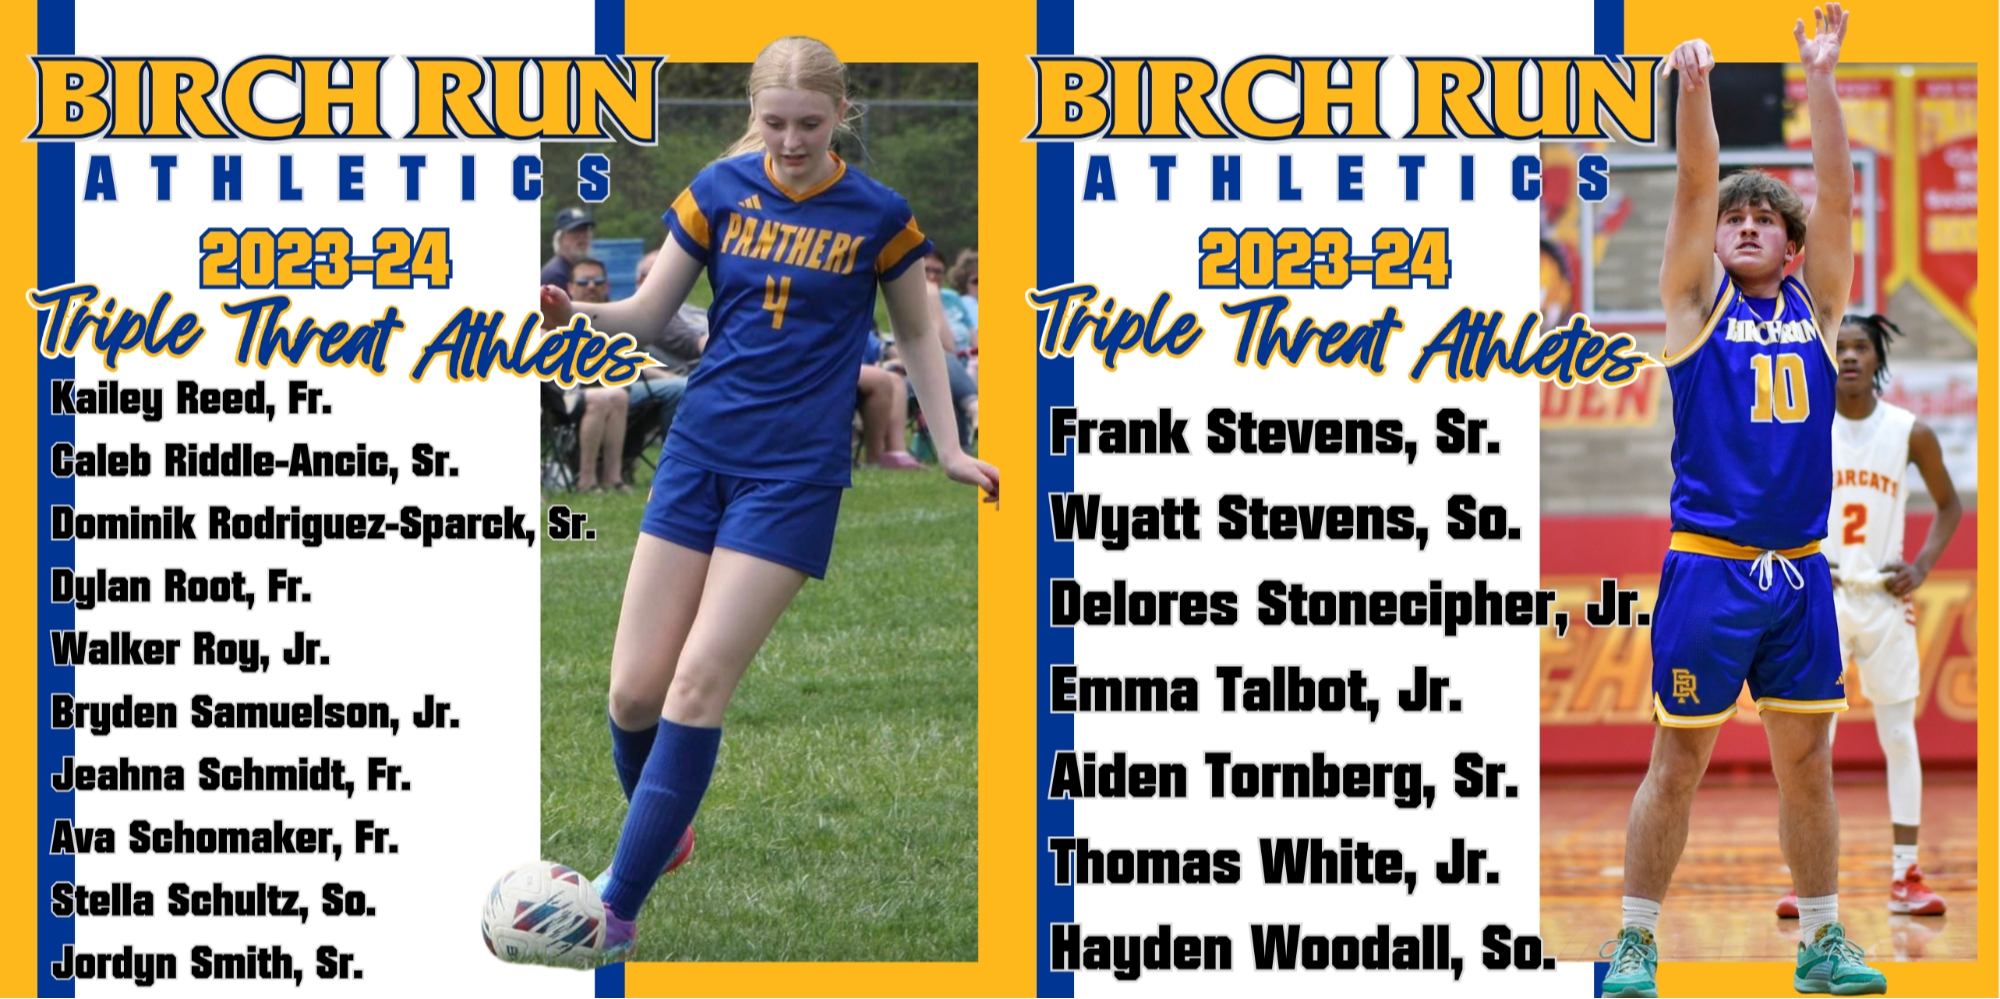  - Content Image for birchrunhighschool_bigteams_17148